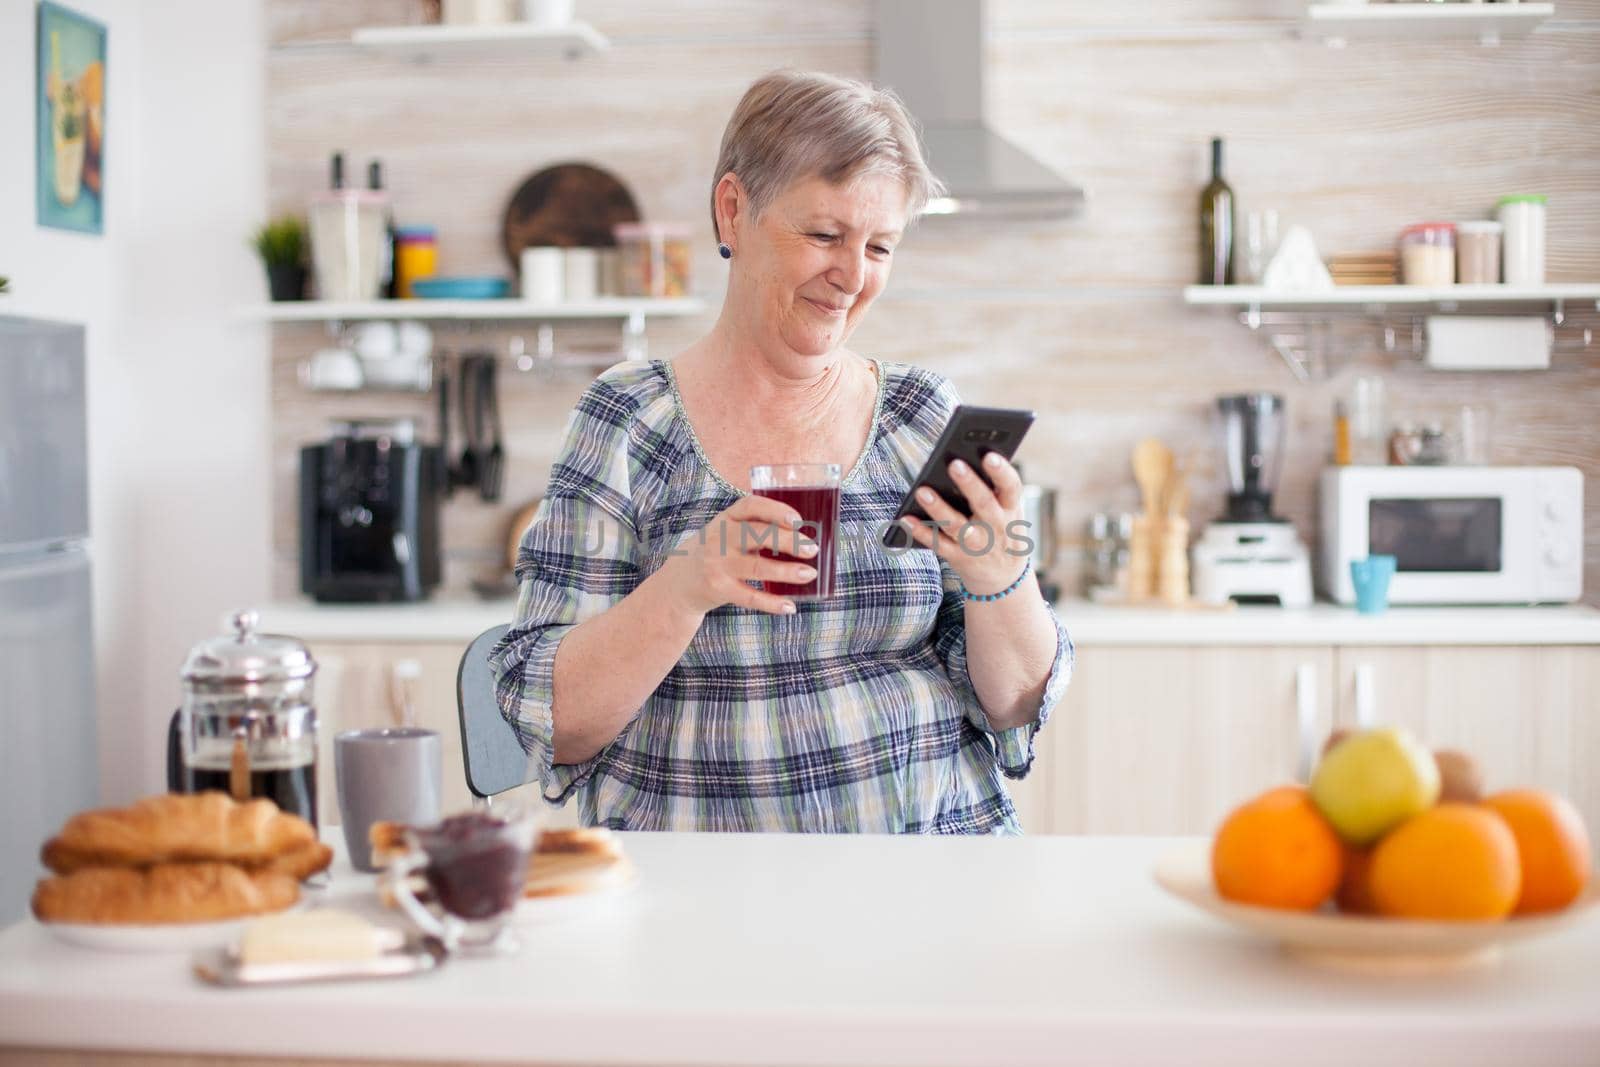 Leisure morning for senior woman using modern technology in bright cozy kitchen. Authentic elderly person using modern smartphone internet technology. Online communication connected to the world, senior leisure time with gadget at retirement age